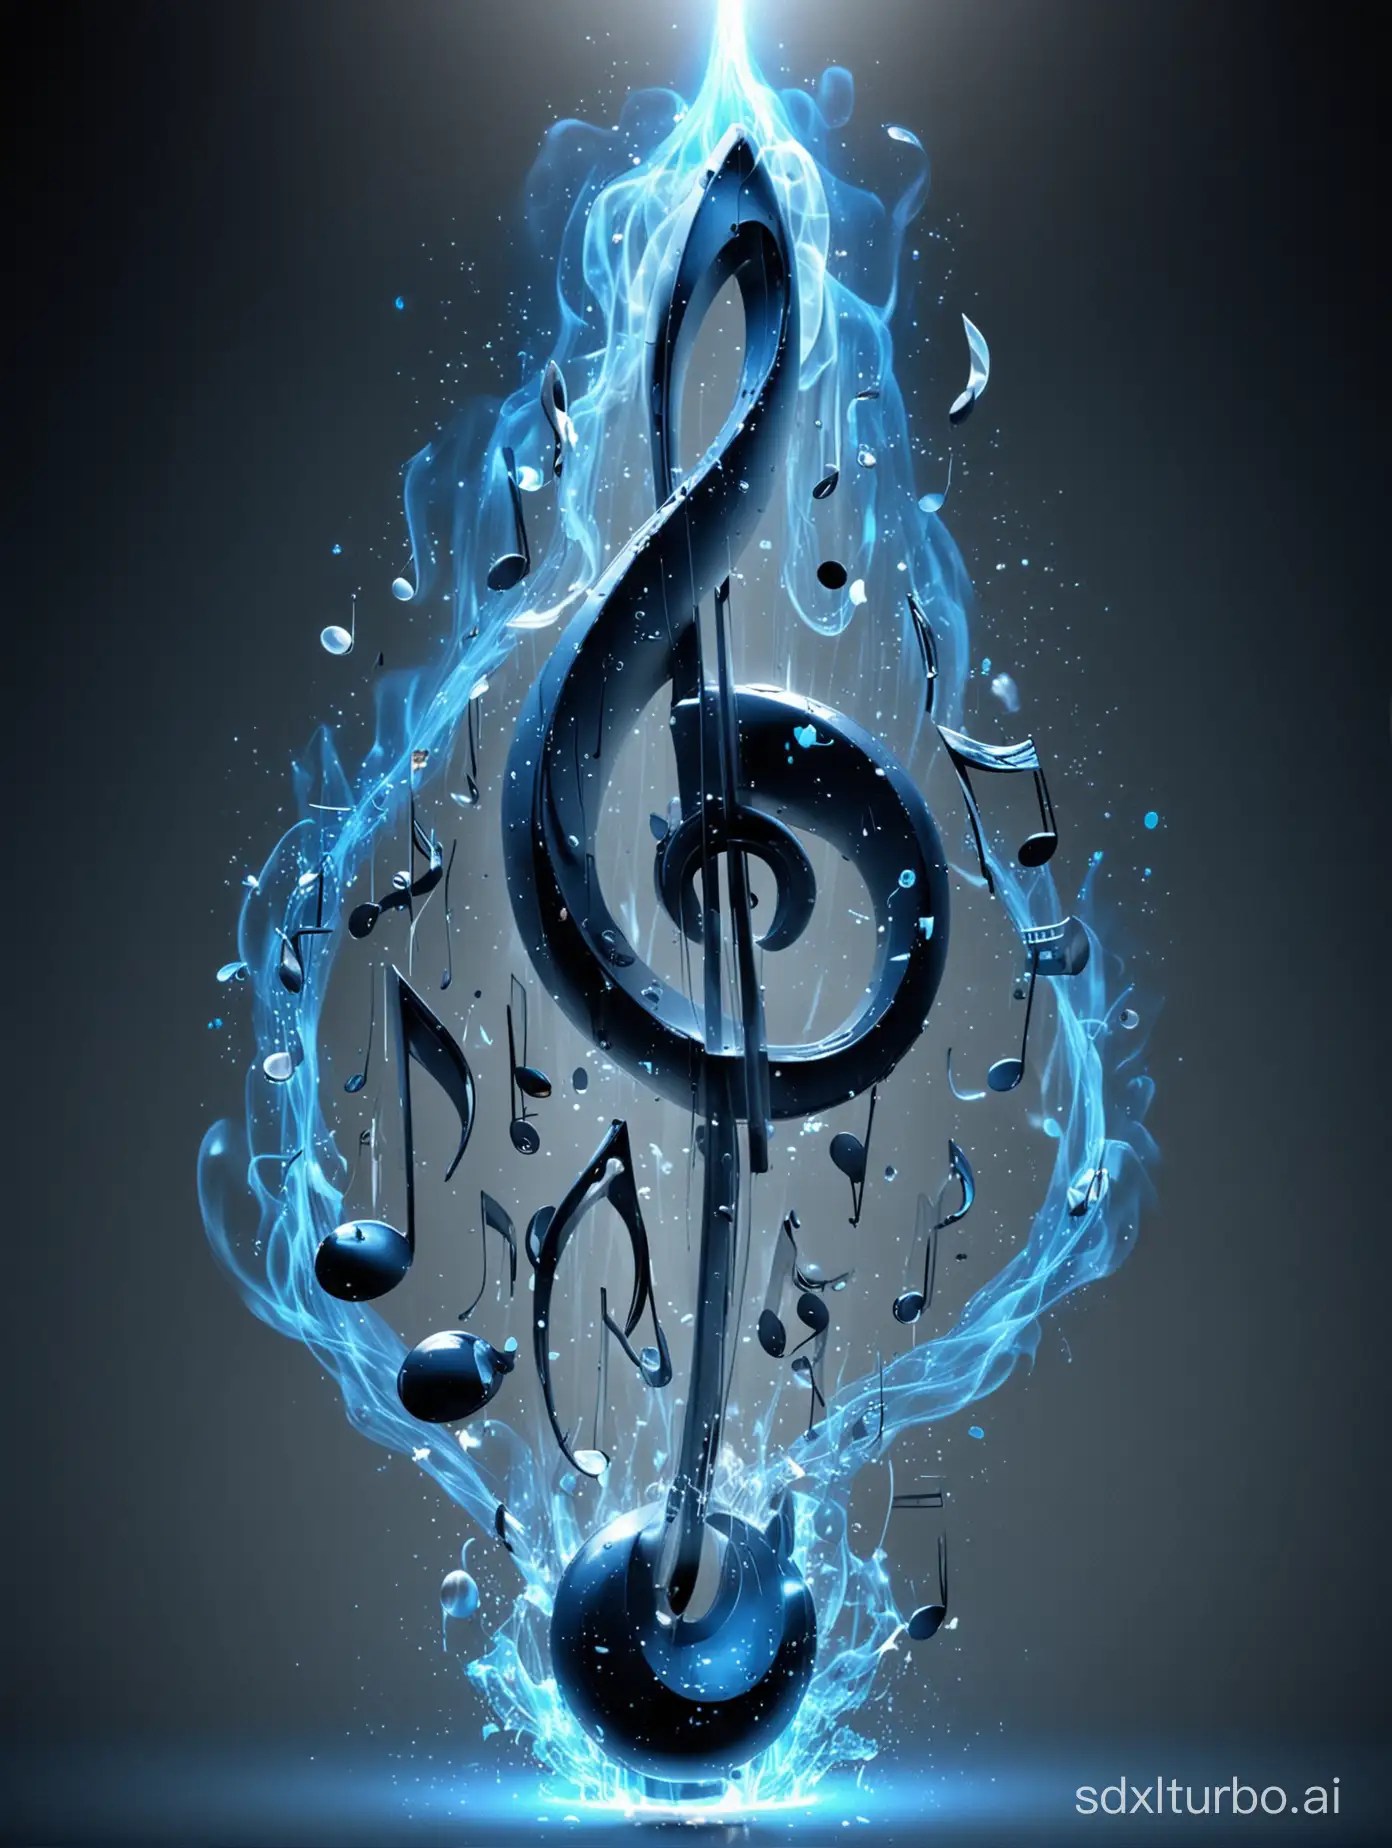 Musical jazz notes are floating around with blue flames eminating off the musical notes.